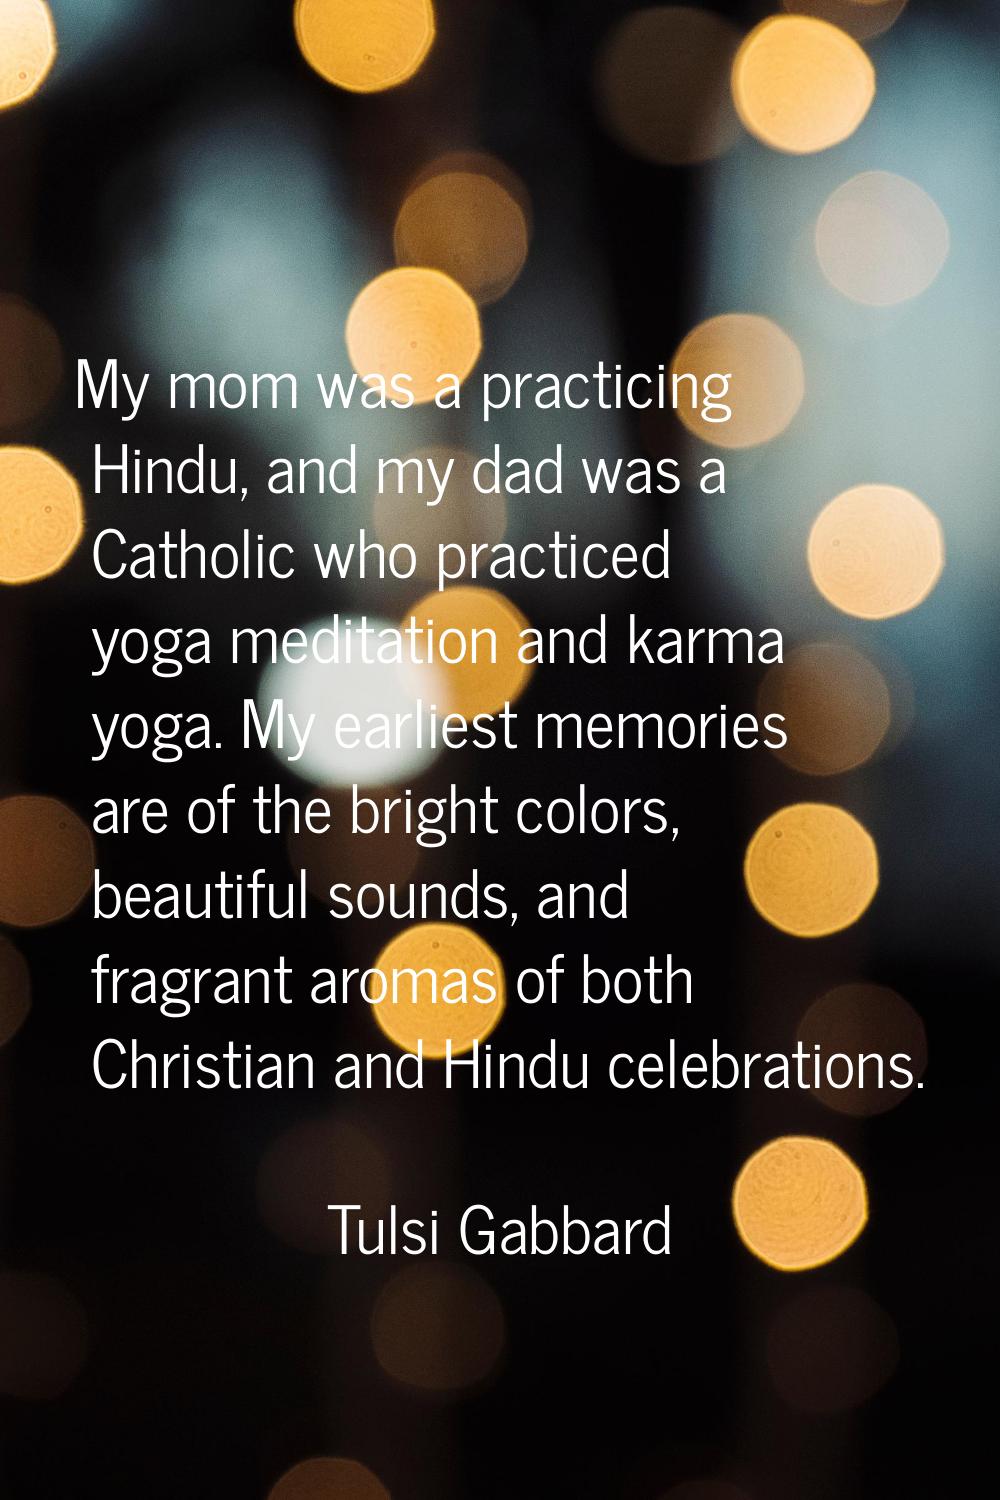 My mom was a practicing Hindu, and my dad was a Catholic who practiced yoga meditation and karma yo